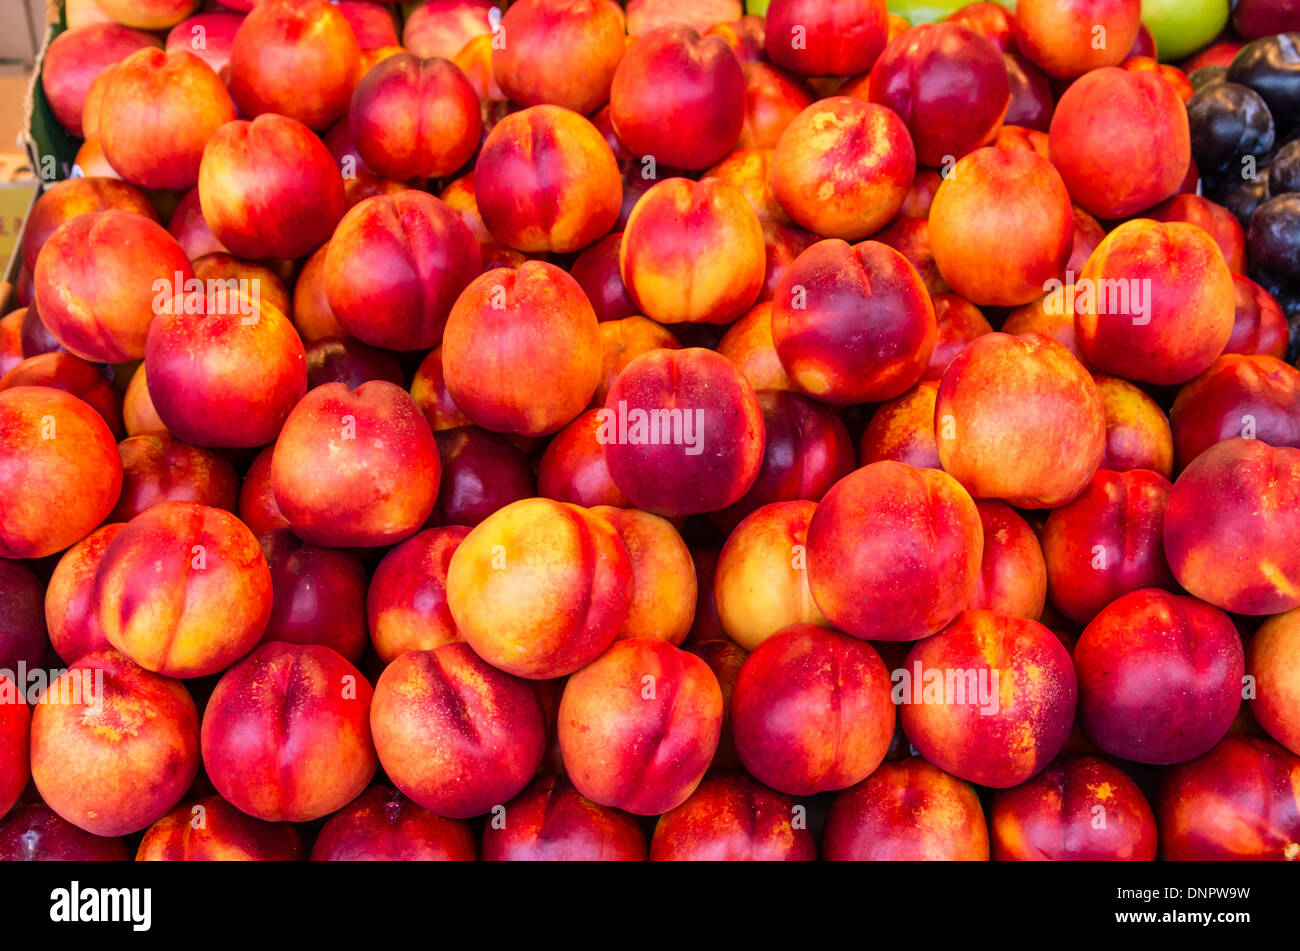 Red ripe nectarines on display in a market stall Pike Place Market Seattle, Washington, USA Stock Photo